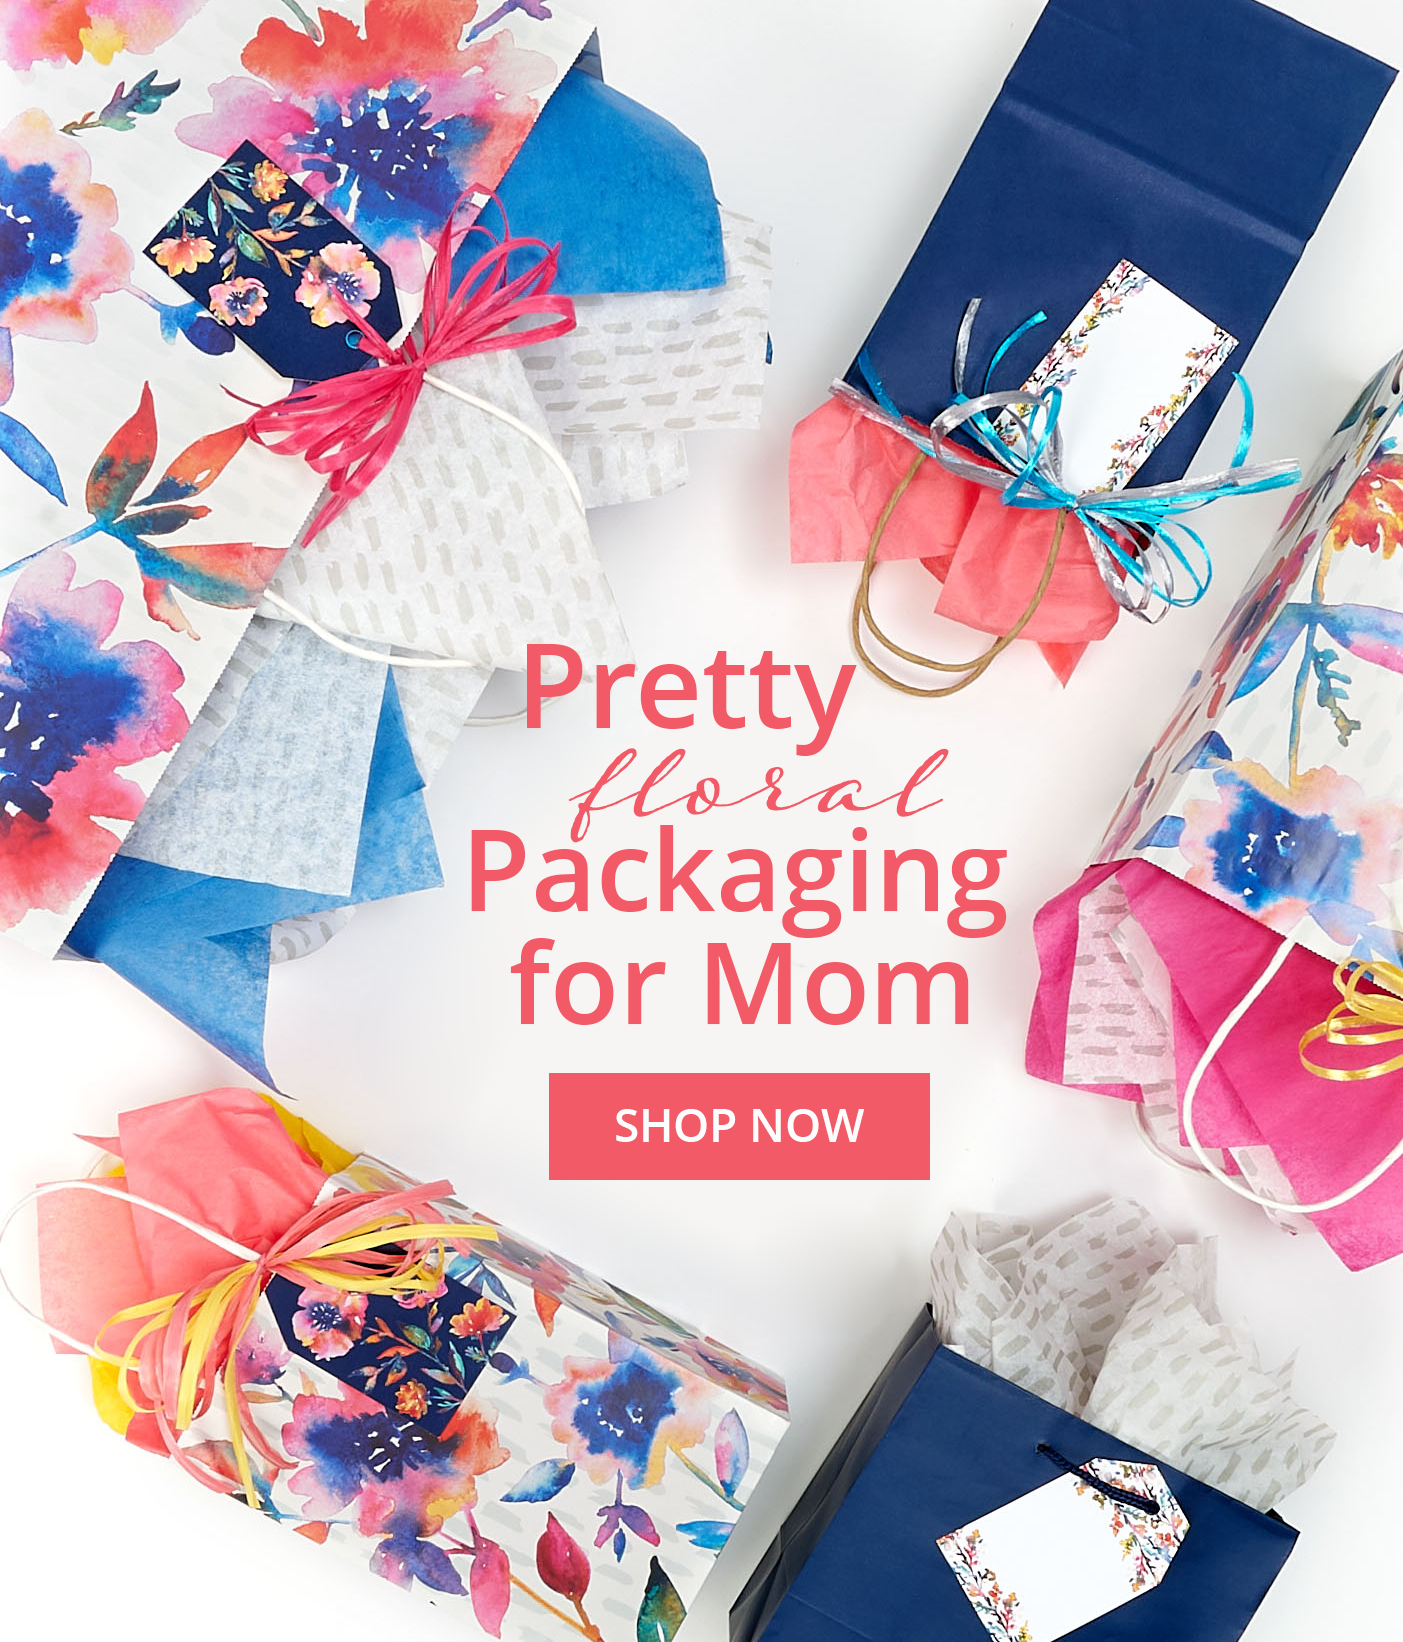 Pretty Floral Packaging for Mom